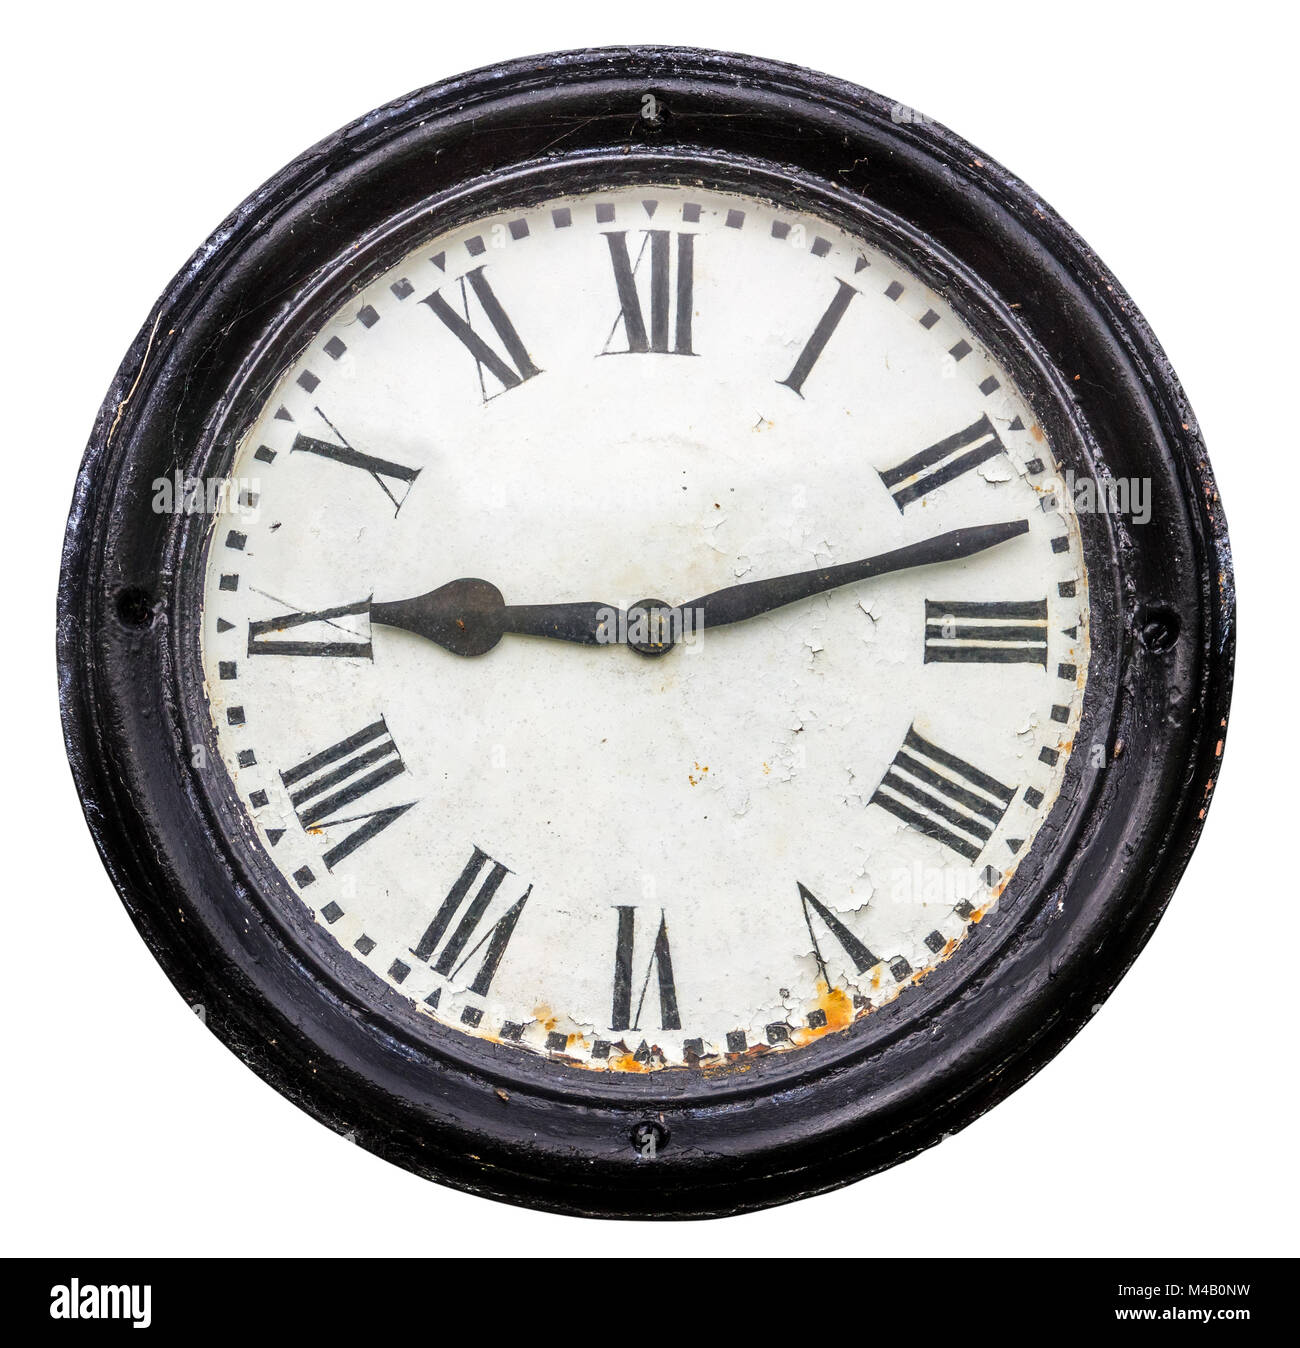 Oregon Scientific projection clock. Projects time onto the wall Stock Photo  - Alamy